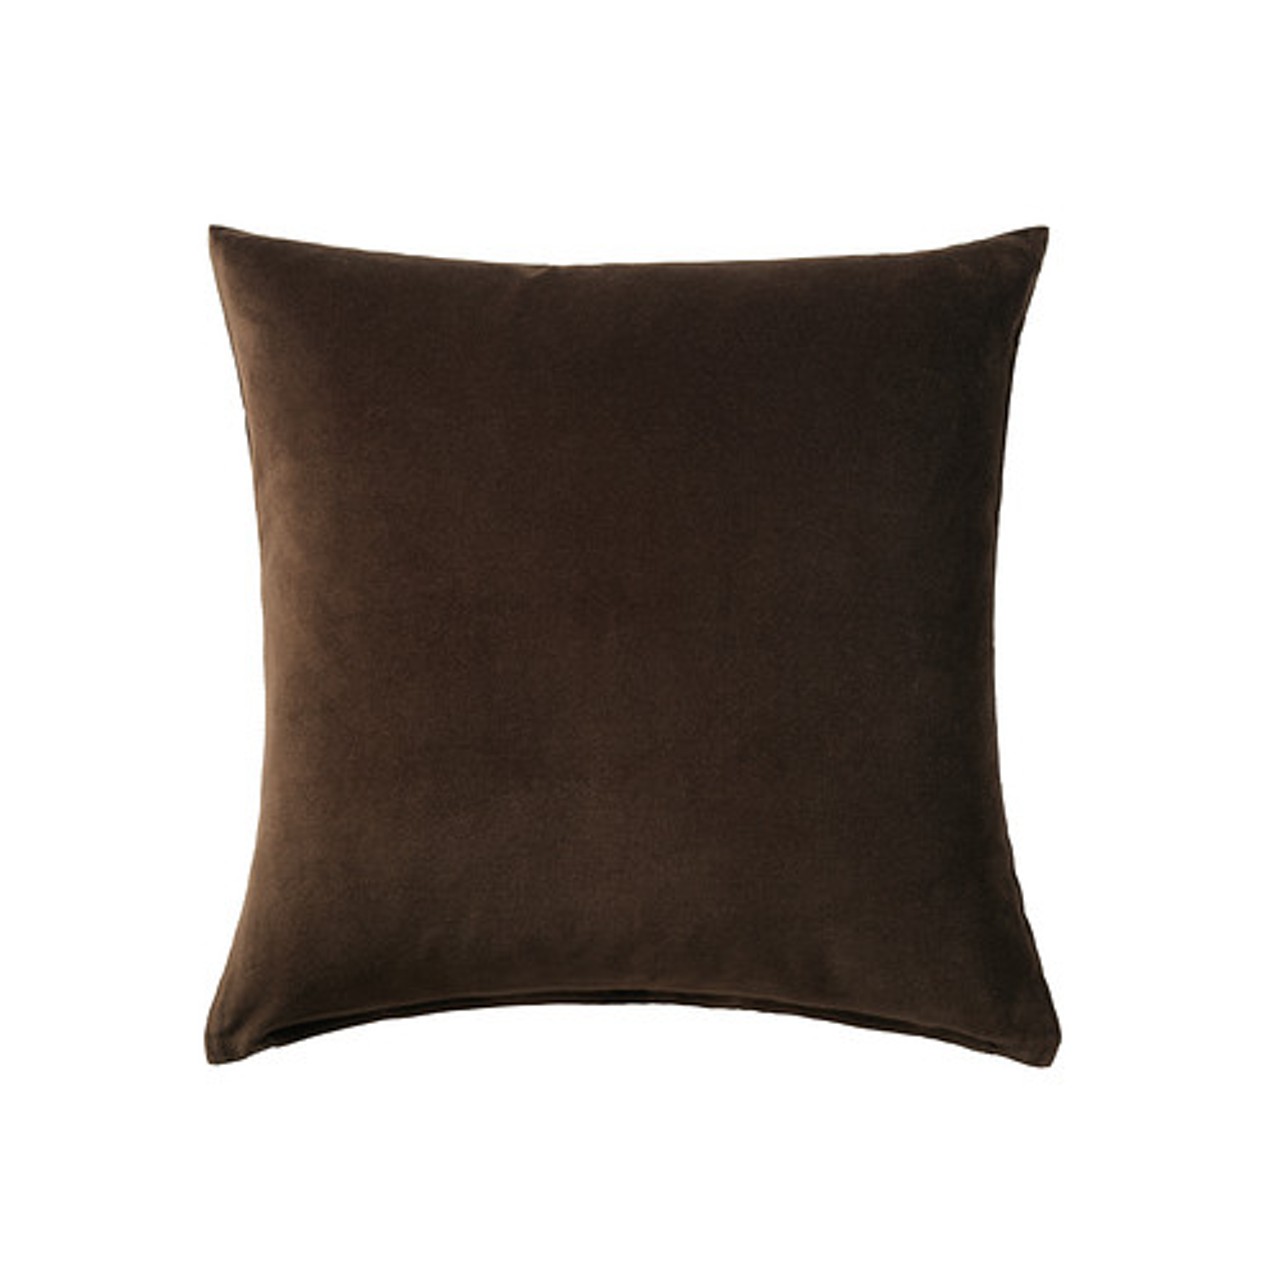 Not to mention this SANELA cushion cover is nothing more...